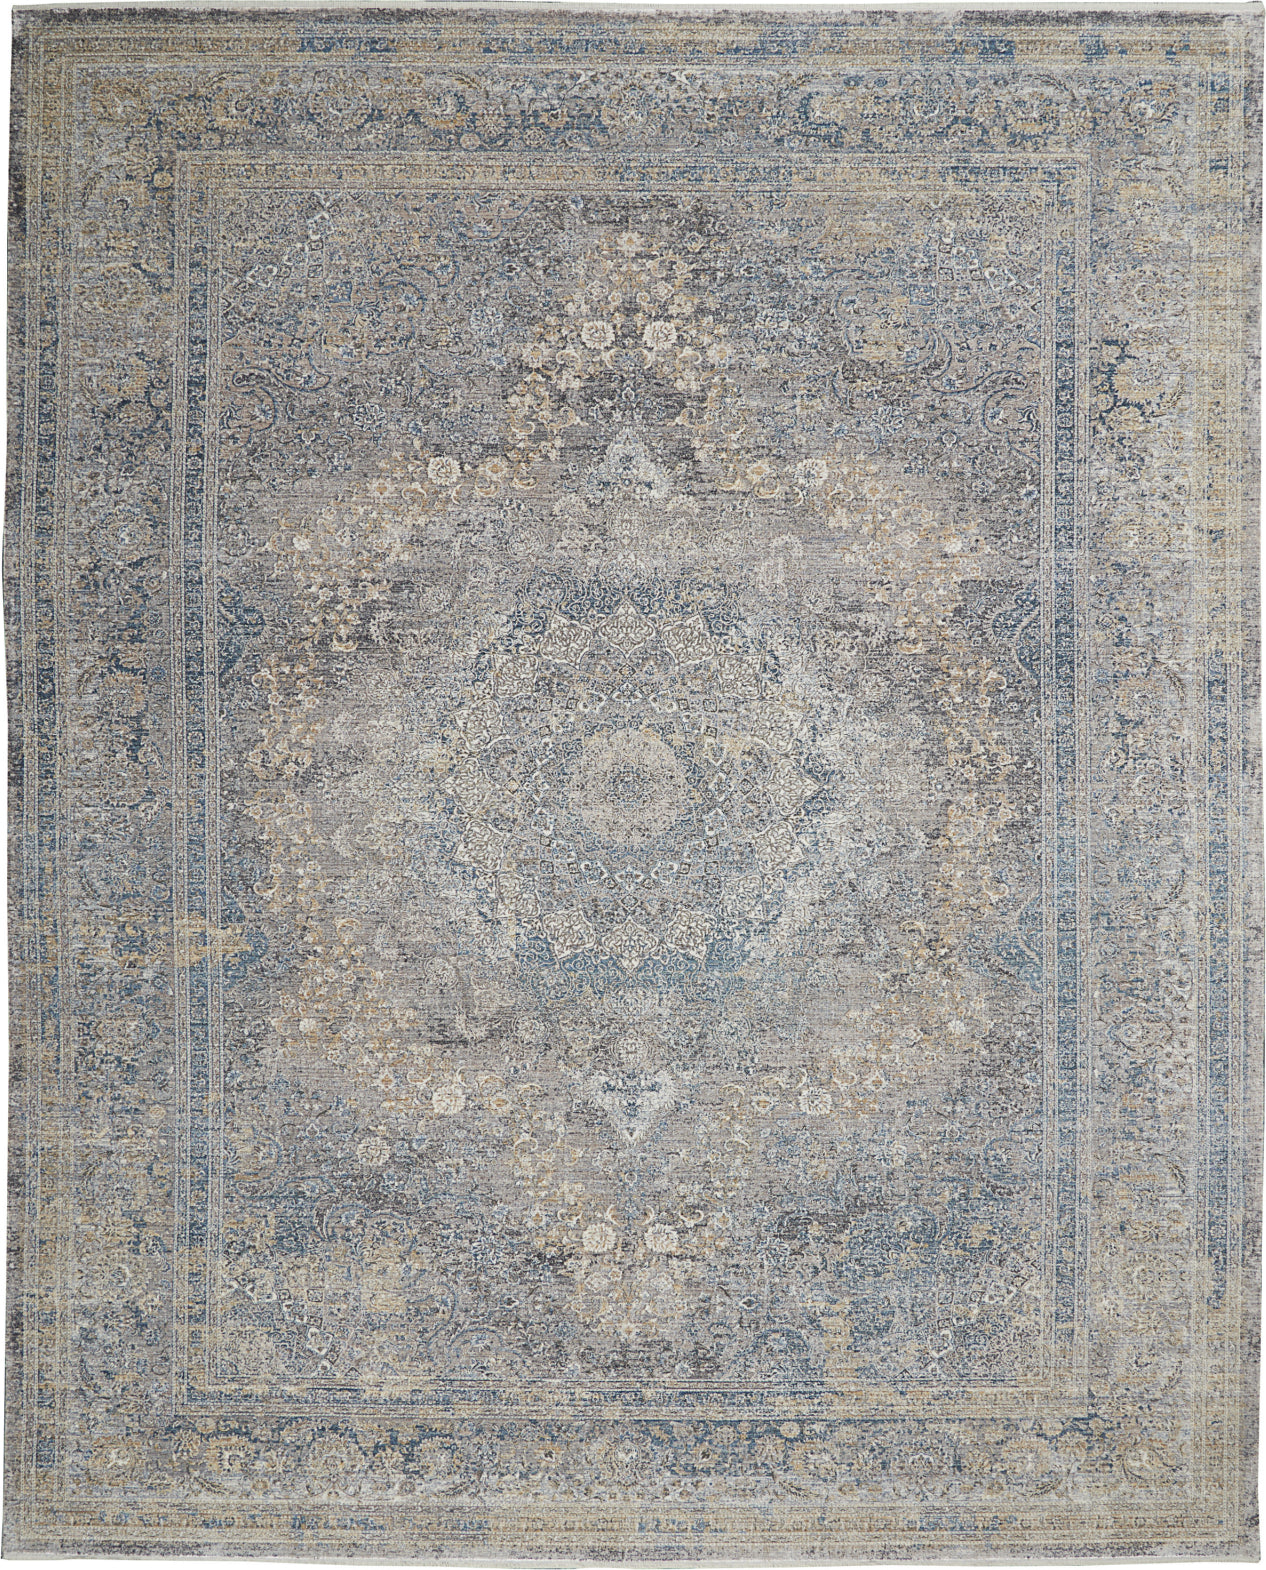 Starry Nights STN06 Cream Blue Area Rug by Nourison Main Image